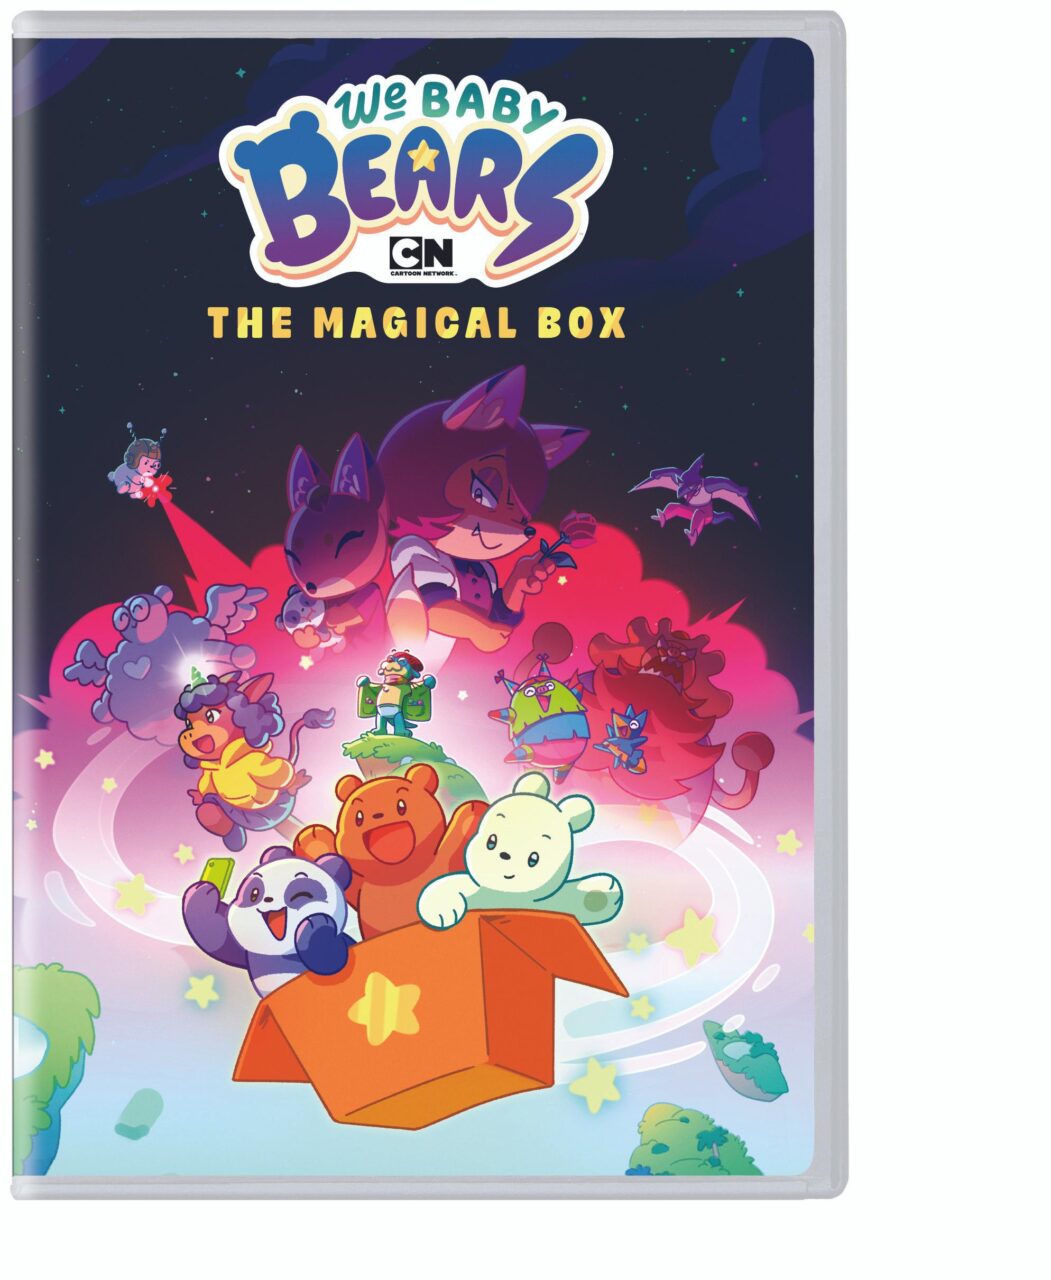 We Baby Bears: The Magical Box DVD cover (Warner Bros. Home Entertainment)